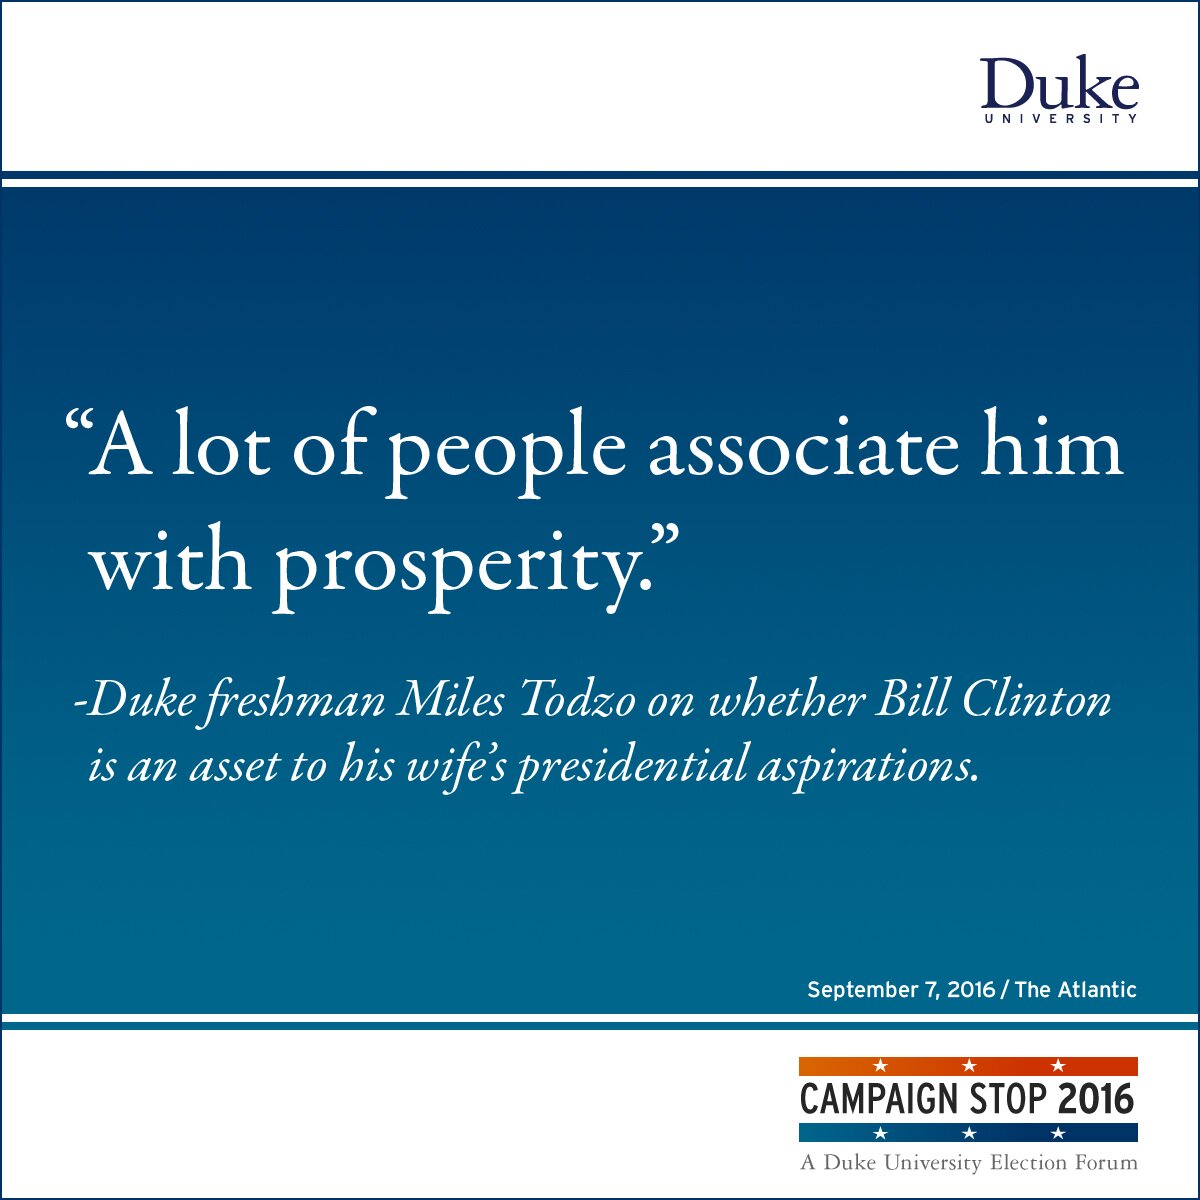 “A lot of people associate him with prosperity.” -Duke freshman Miles Todzo on whether Bill Clinton is an asset to his wife’s presidential aspirations.